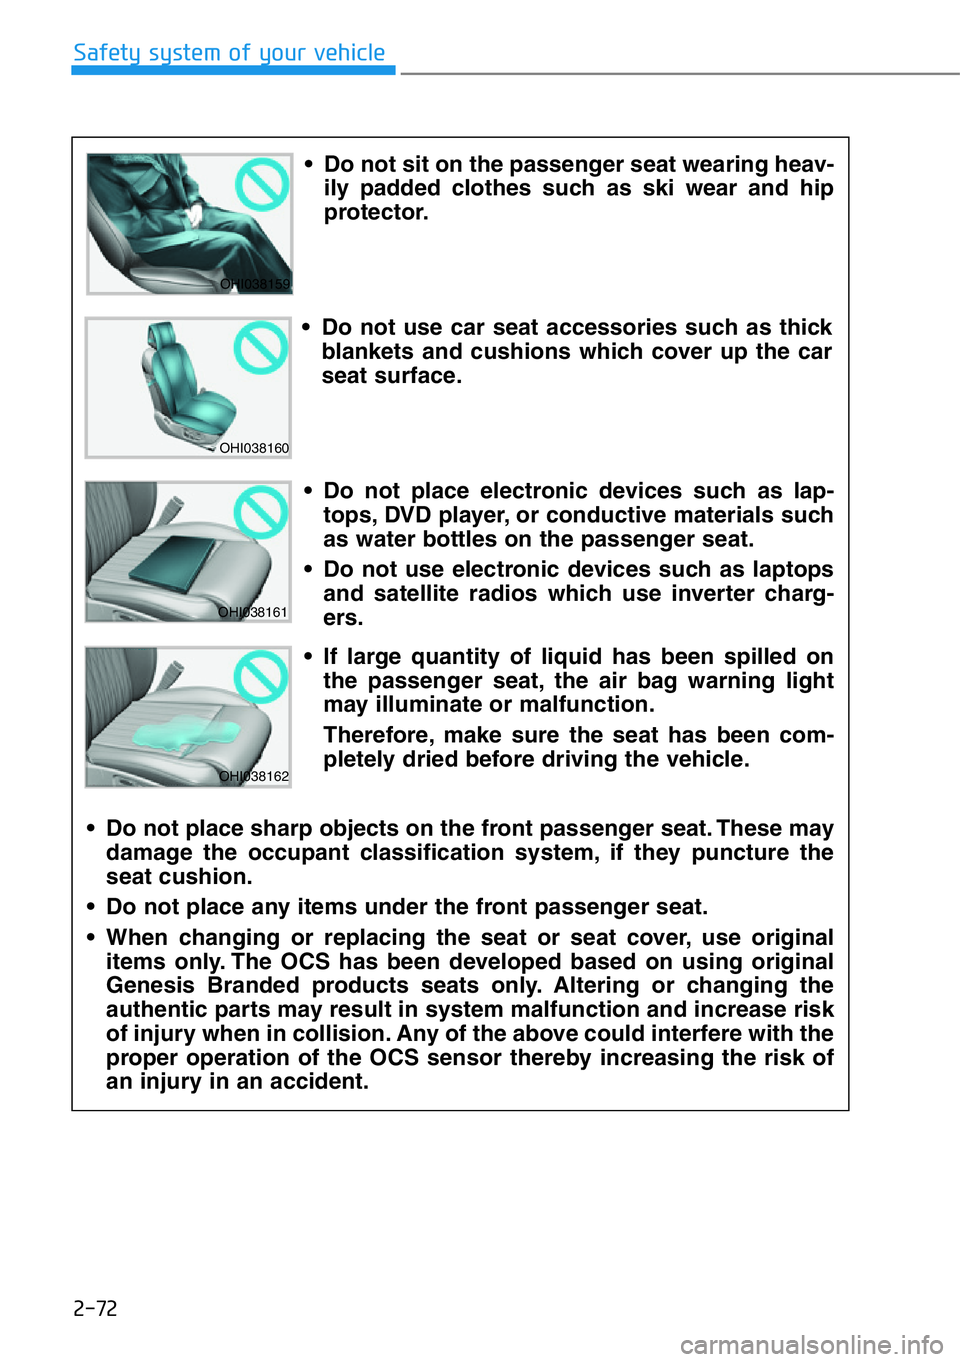 HYUNDAI GENESIS G90 2021  Owners Manual 2-72
Safety system of your vehicle
OHI038159
OHI038160
OHI038161
OHI038162
• Do not sit on the passenger seat wearing heav-
ily padded clothes such as ski wear and hip
protector.
• Do not use car 